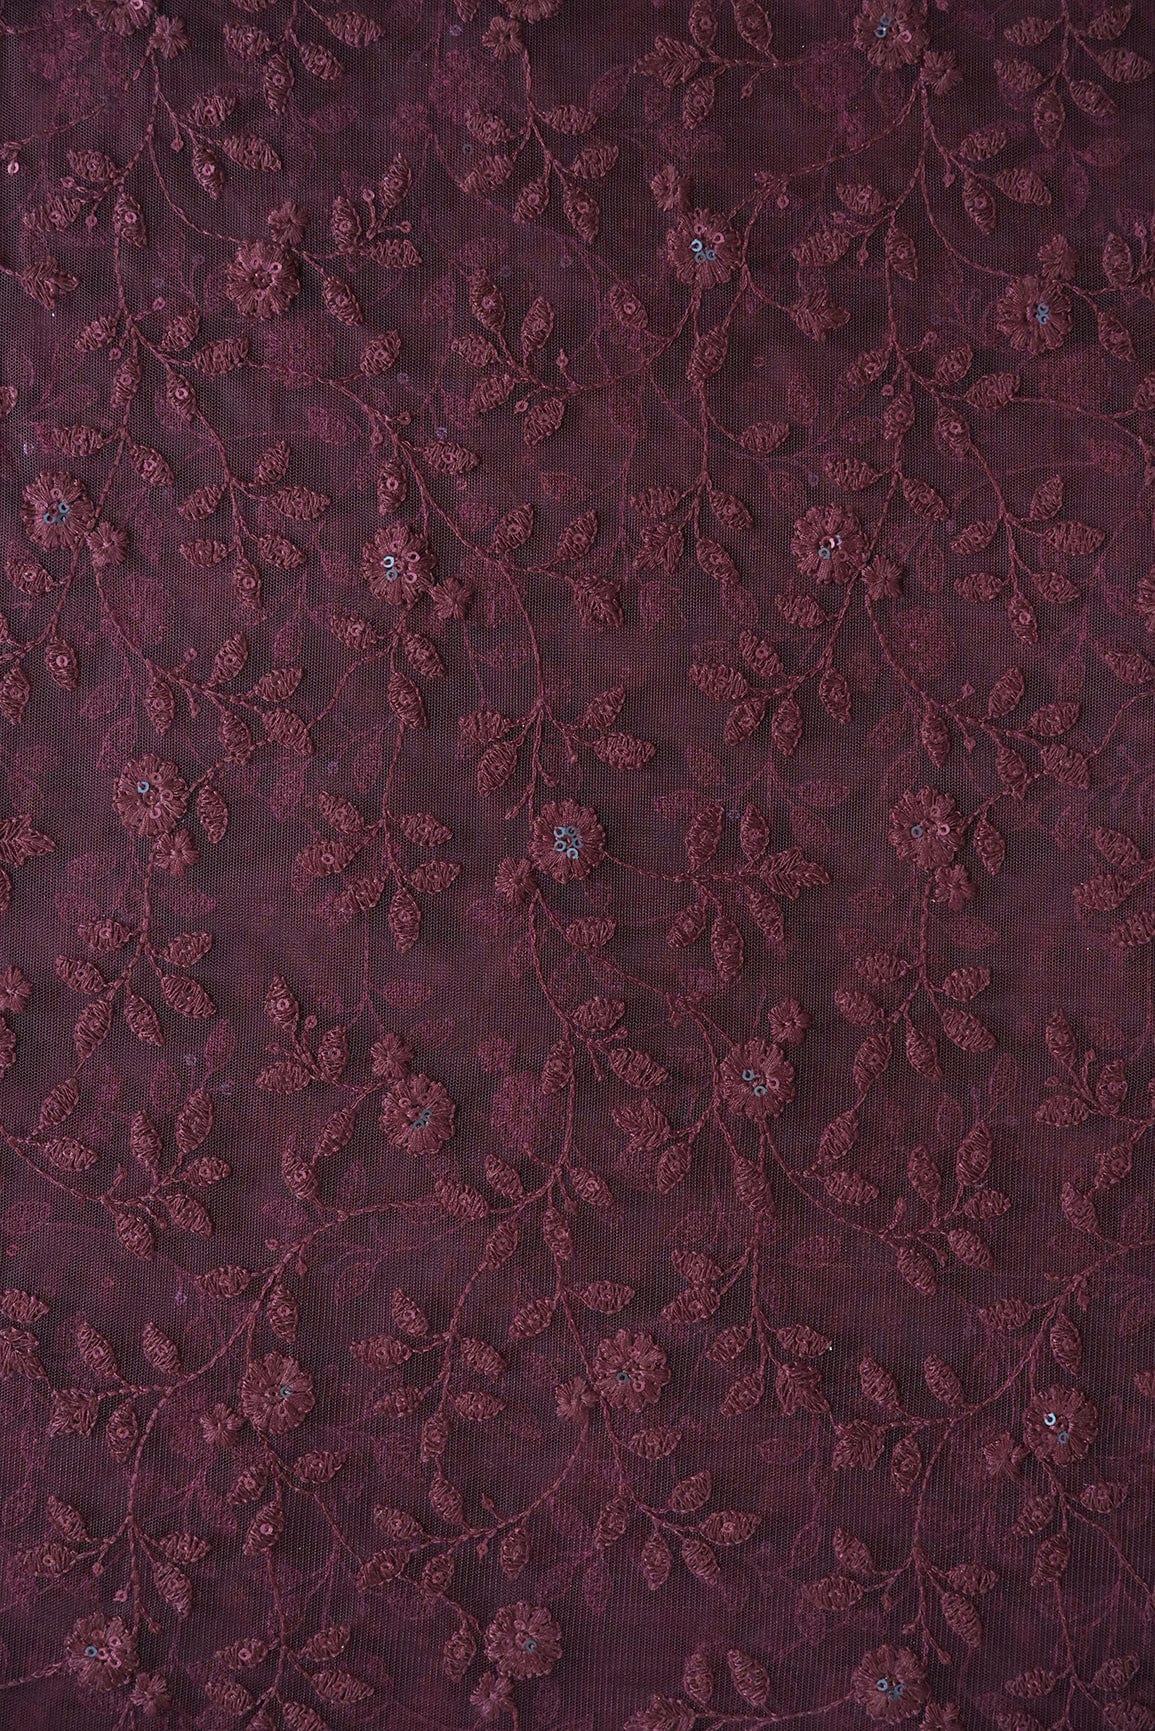 doeraa Embroidery Fabrics Wine Thread And Sequins Floral Heavy Embroidery Work On Wine Soft Net Fabric